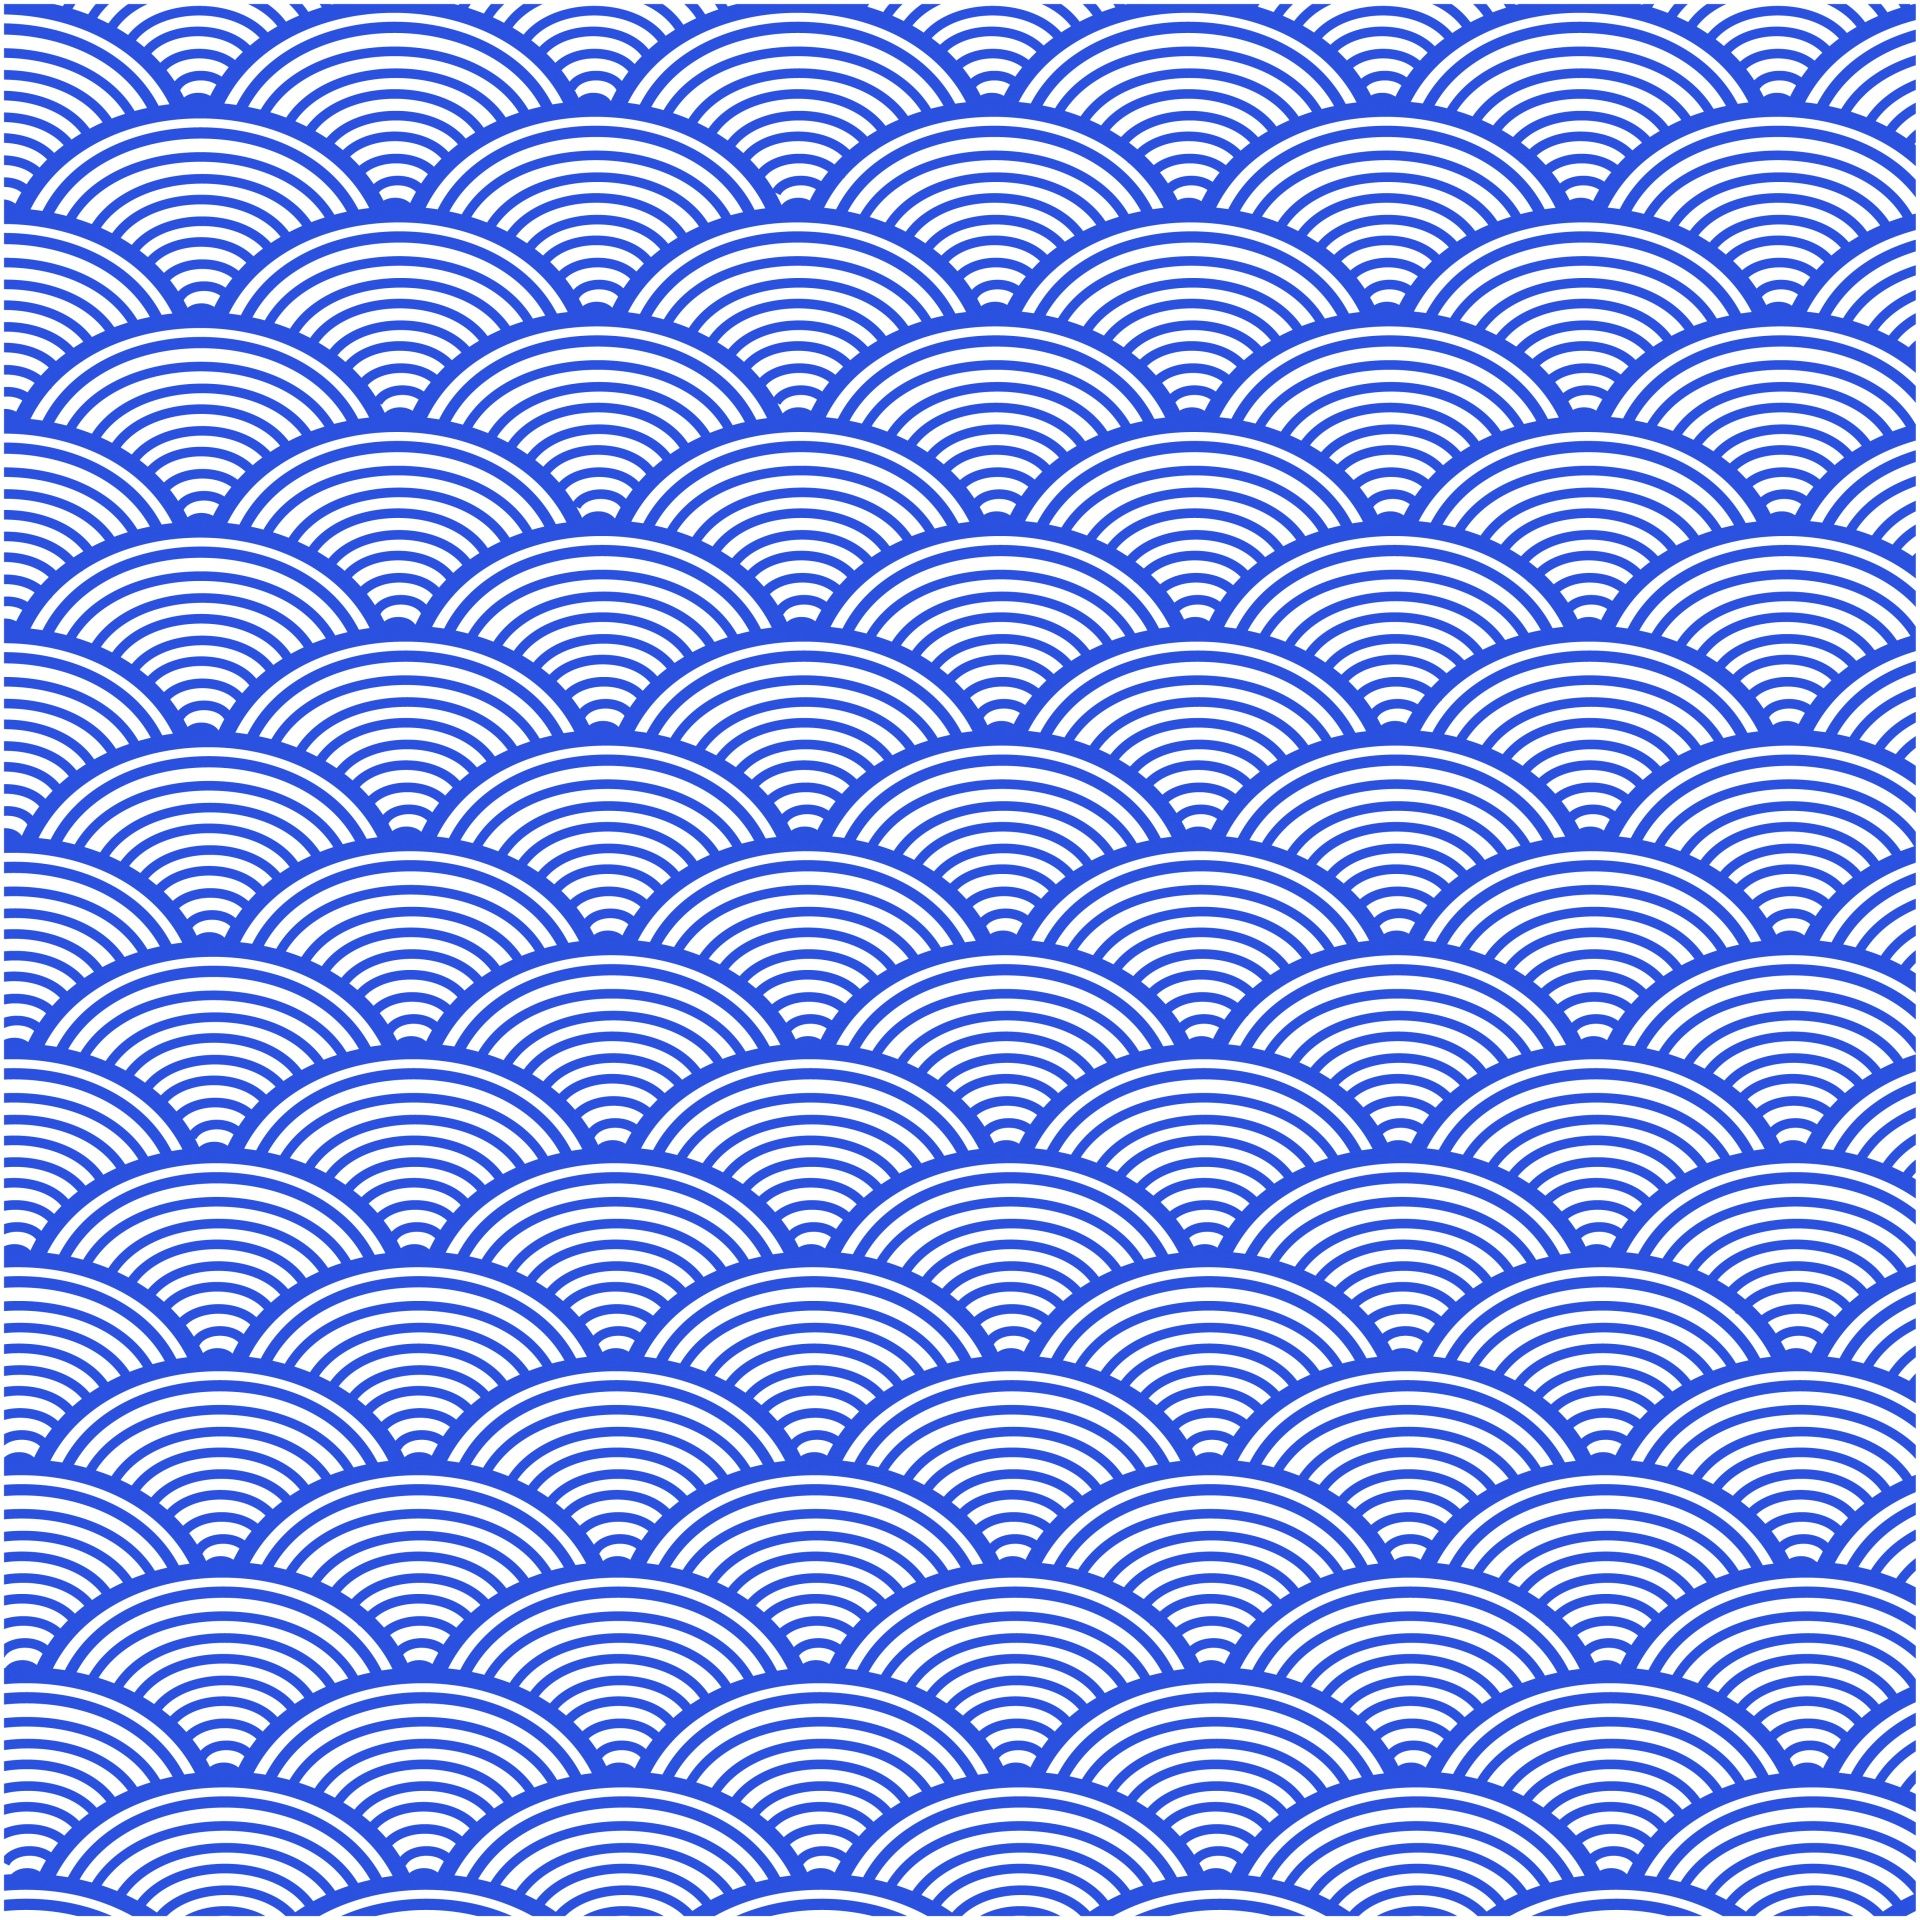 Japanese Wave Wallpaper Background Free Domain